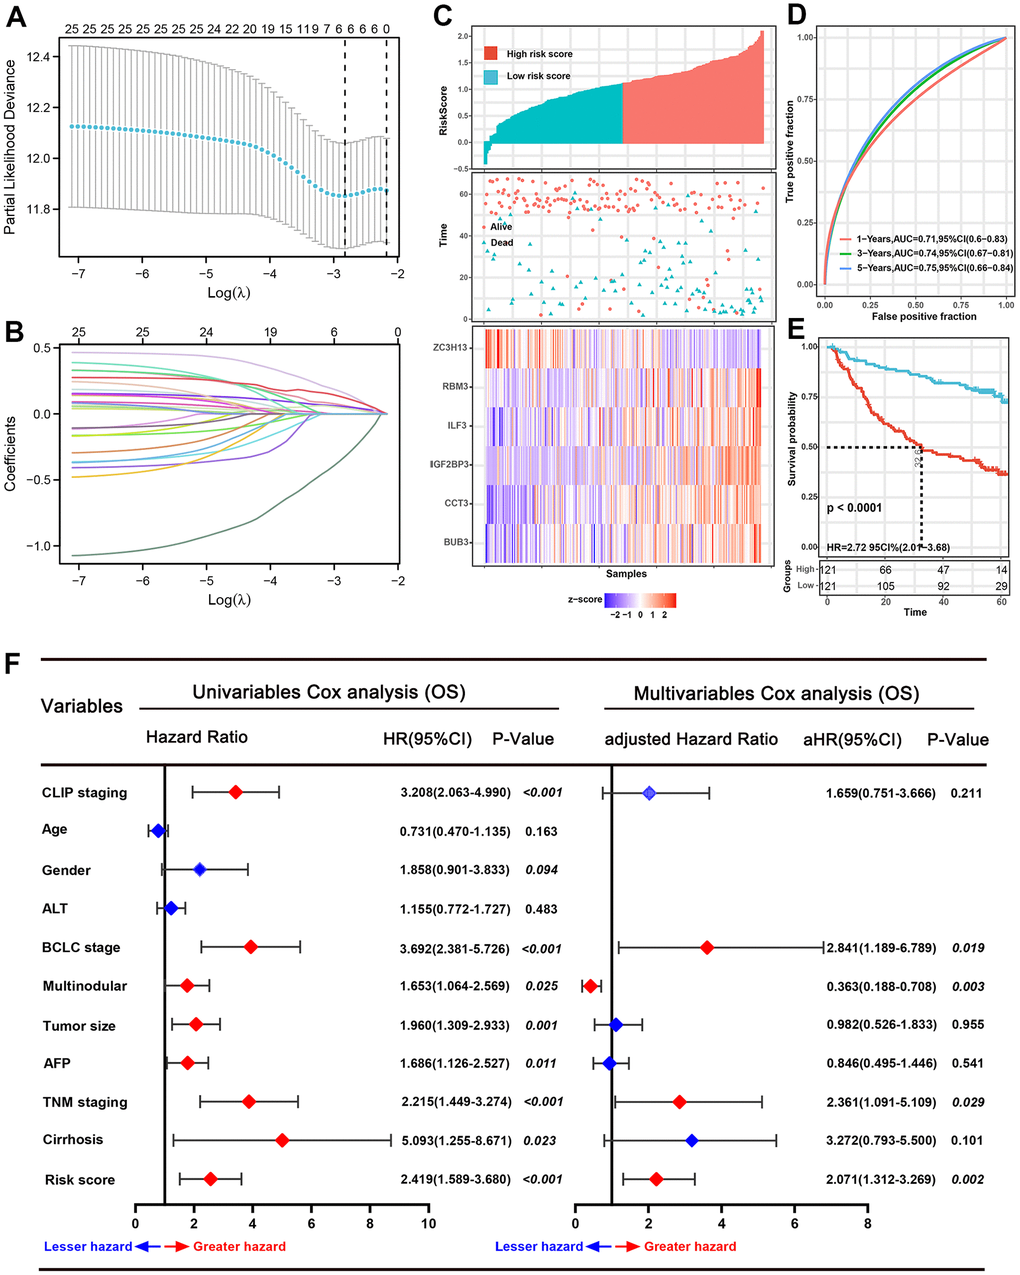 Prognostic analysis of the six-spliceosome-related gene signature in the training set. (A) six spliceosome-related genes were identified by the Least absolute shrinkage and selection operator (LASSO) regression model according to minimum criteria. (B) The coefficient of spliceosome-related genes was calculated by LASSO regression. (C) HCC patients were divided into high-risk and low-risk score groups based on the median risk score; High-risk score groups had lower survival rates than patients in low-risk score groups; Patients in high-risk score groups has lower ZC3H13 mRNA expression, whereas higher RBM3, ILF3, IGF2BP3, CCT3, and BUB3 mRNA levels. (D) 1-, 3-, and 5-year time-dependent receiver operating characteristic curve (ROC) of the spliceosome-related genes signature in the training cohort. (E) High-risk score patients have poorer overall survival probability than patients with low-risk scores in the training set. (F) Forrest plot of the univariate and multivariate Cox regression analyses for overall survival in the training set.